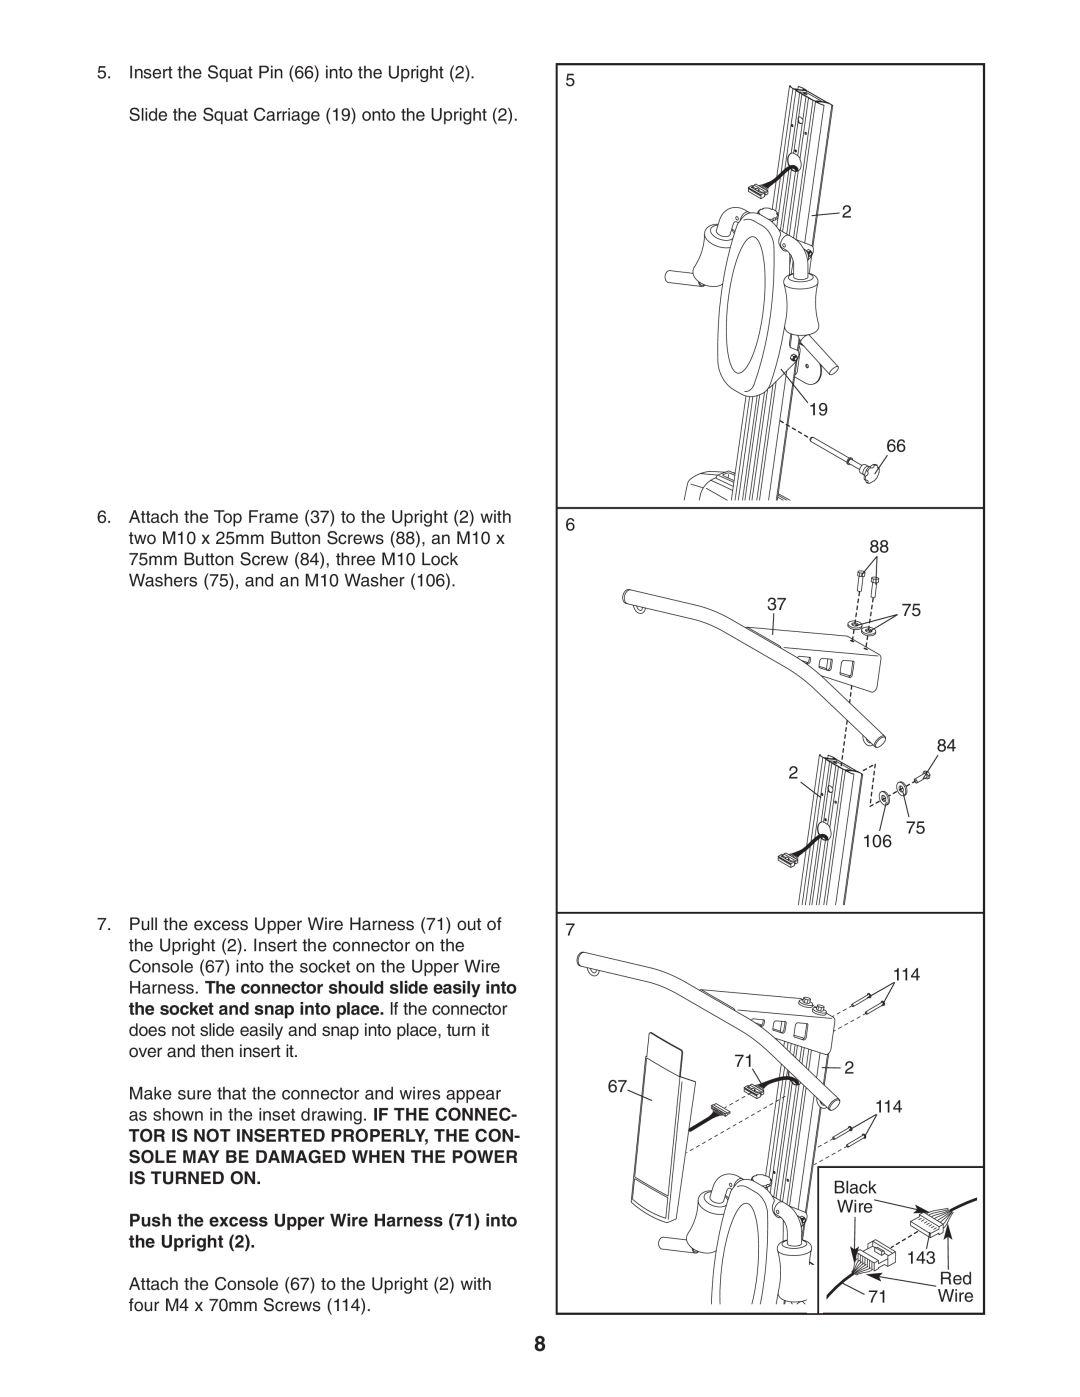 Weider WESY78734 user manual Push the excess Upper Wire Harness 71 into the Upright 